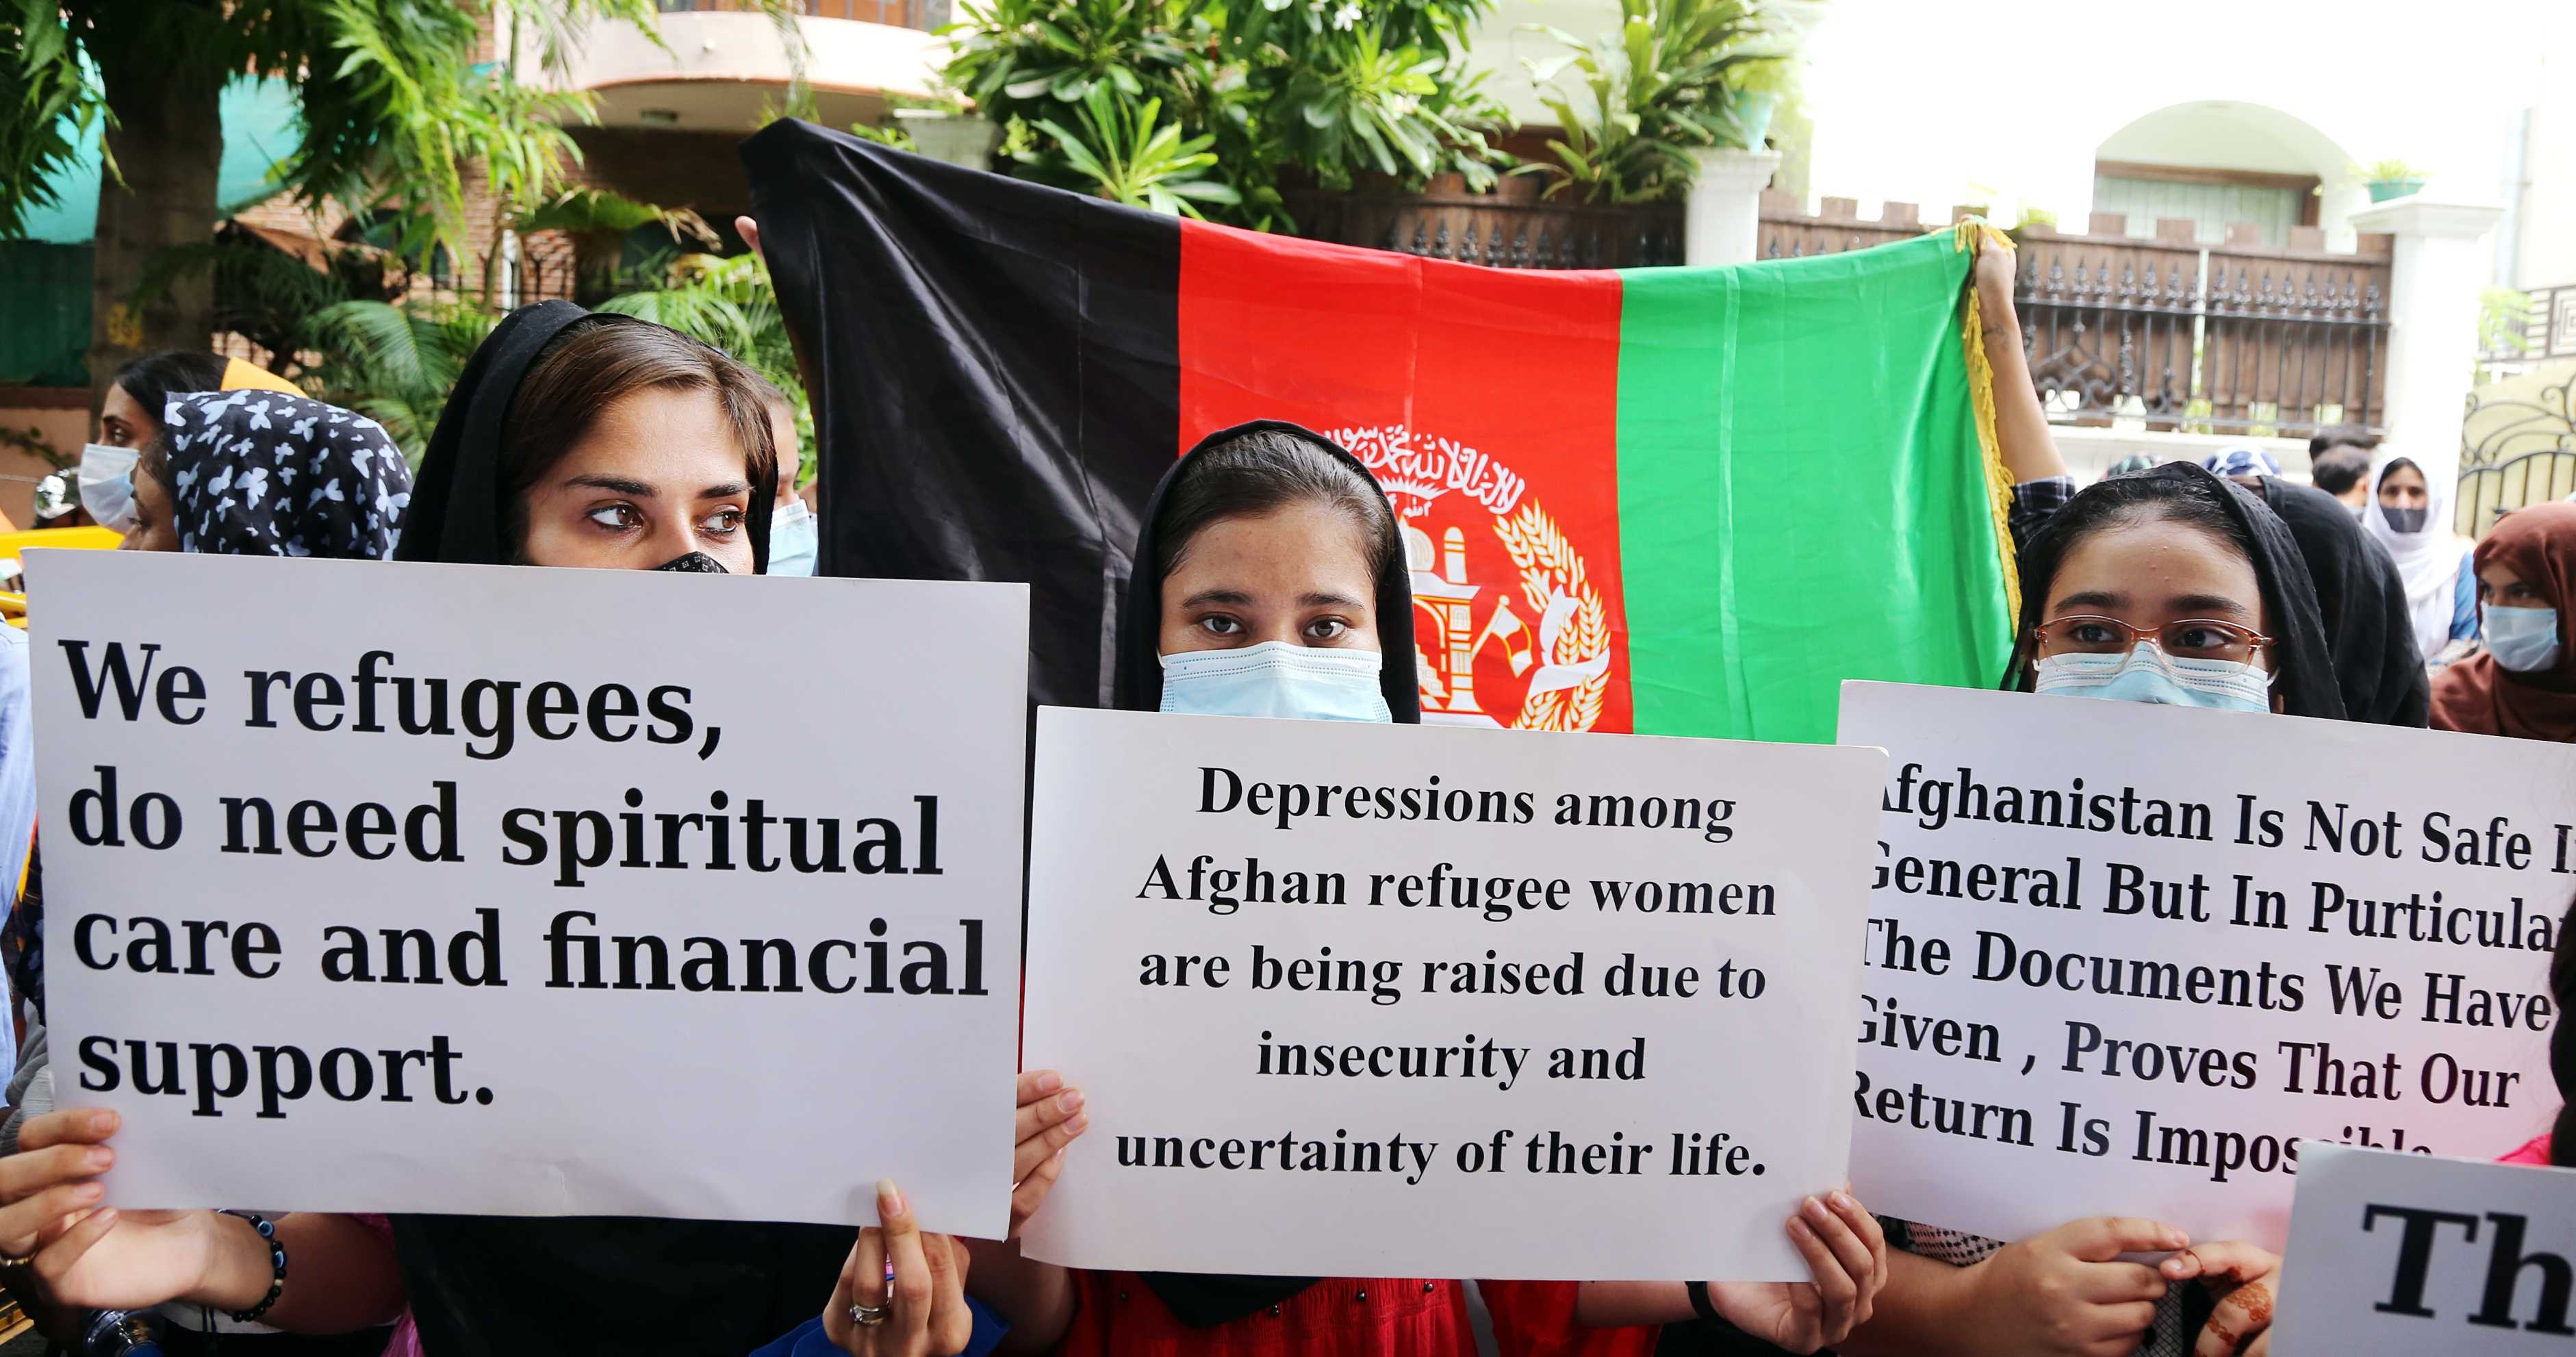 The world is closely watching the unfolding situation in Afghanistan as the countries have scrambled to evacuate their citizens from Afghanistan in an attempt to secure their people.